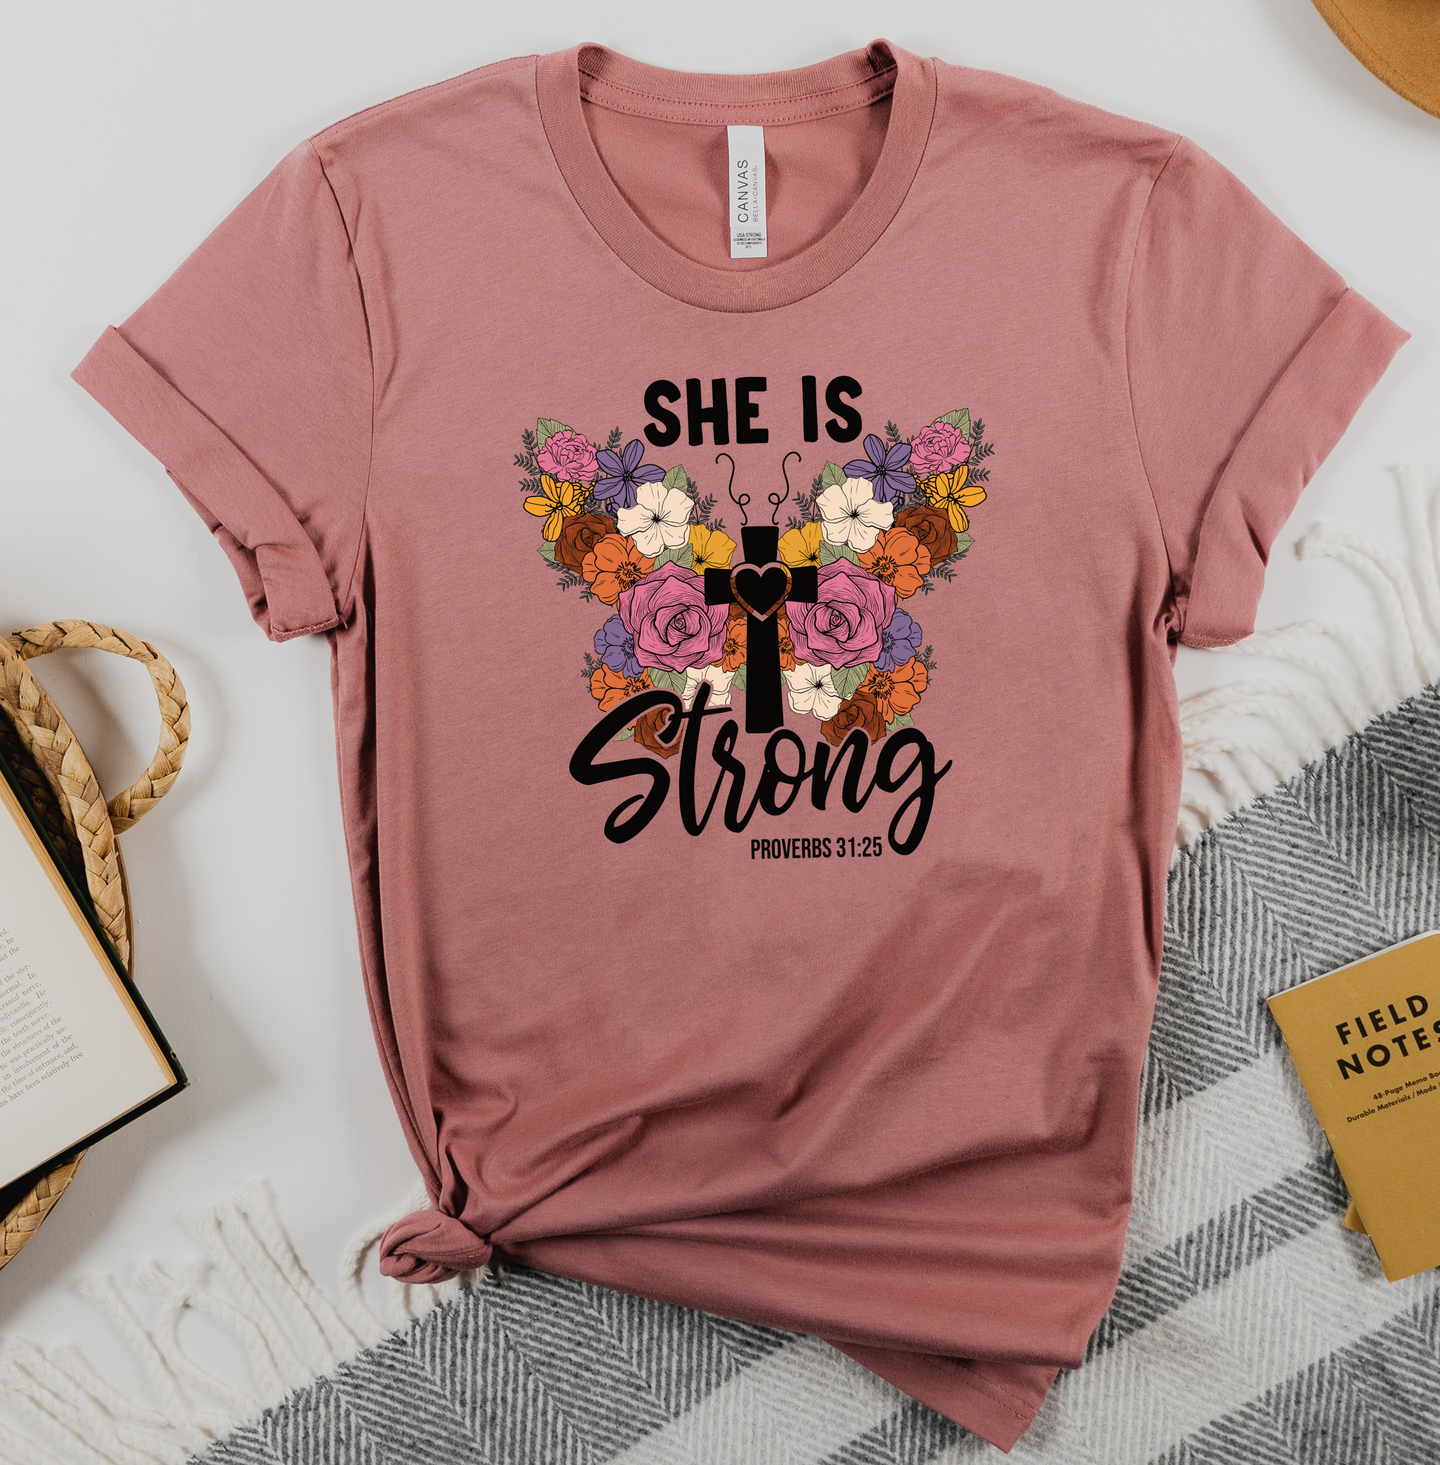 She is Strong Graphic T-Shirt